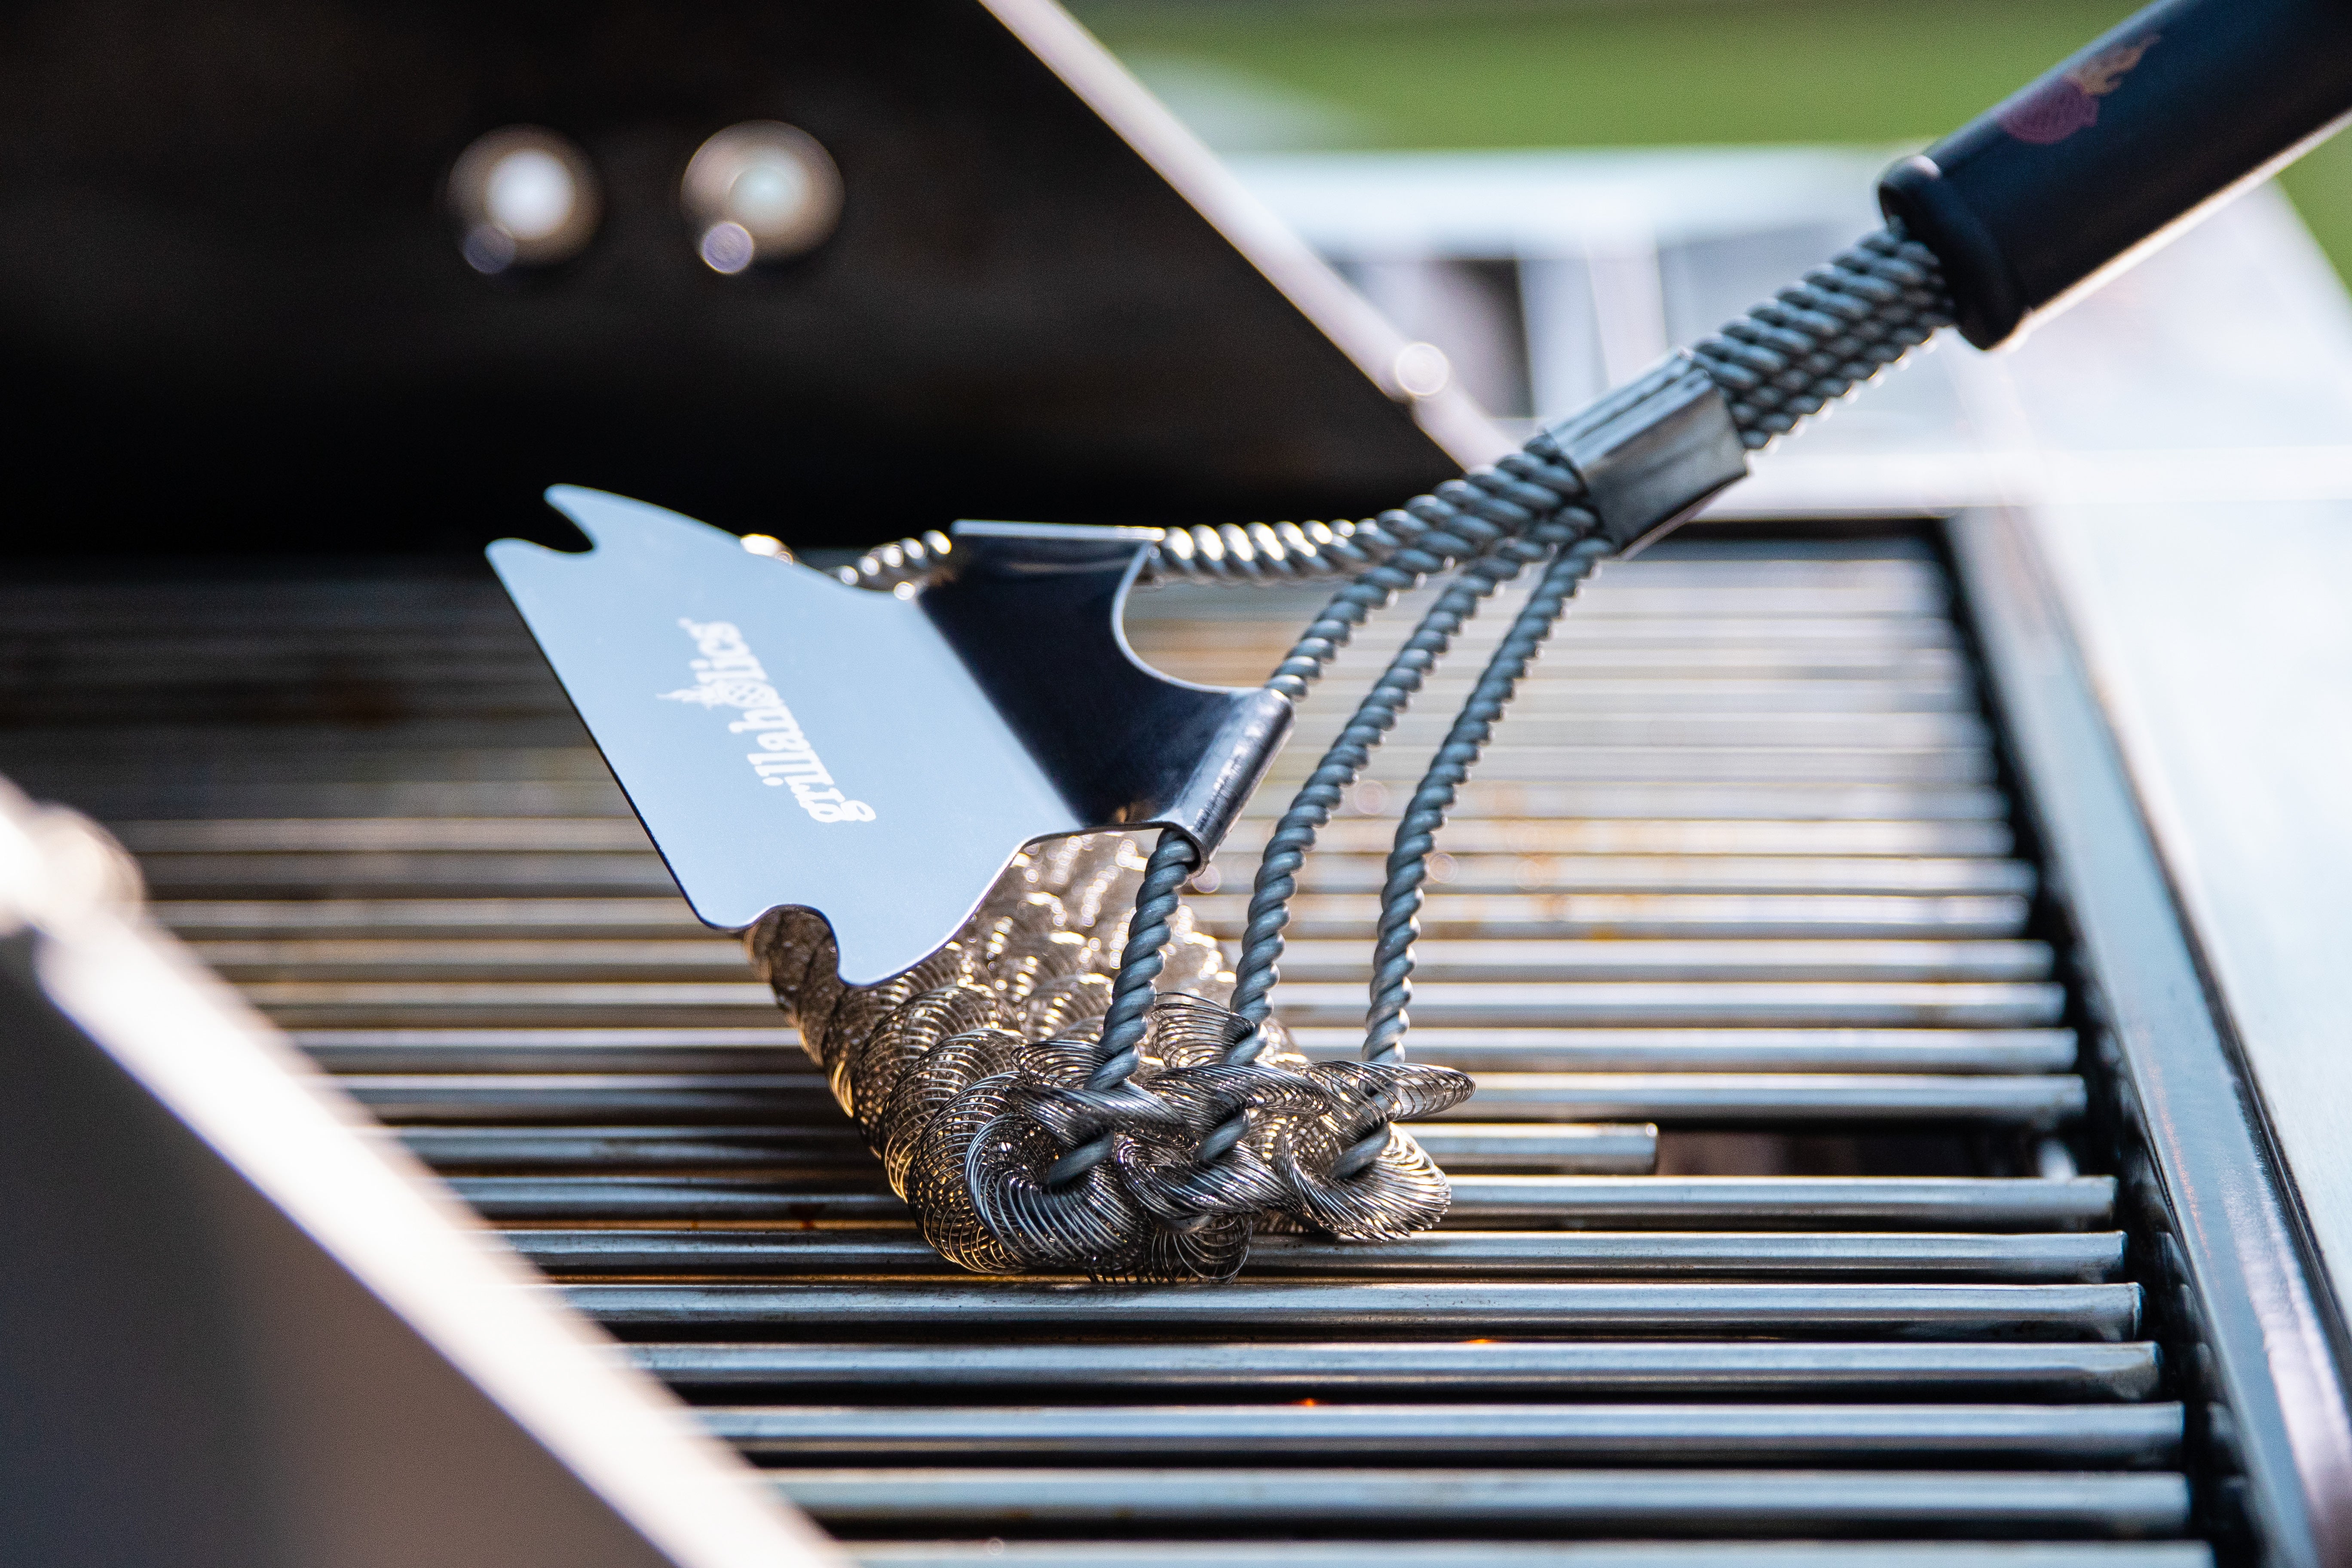  Grillaholics Grill Brush Bristle Free - Safe Grill